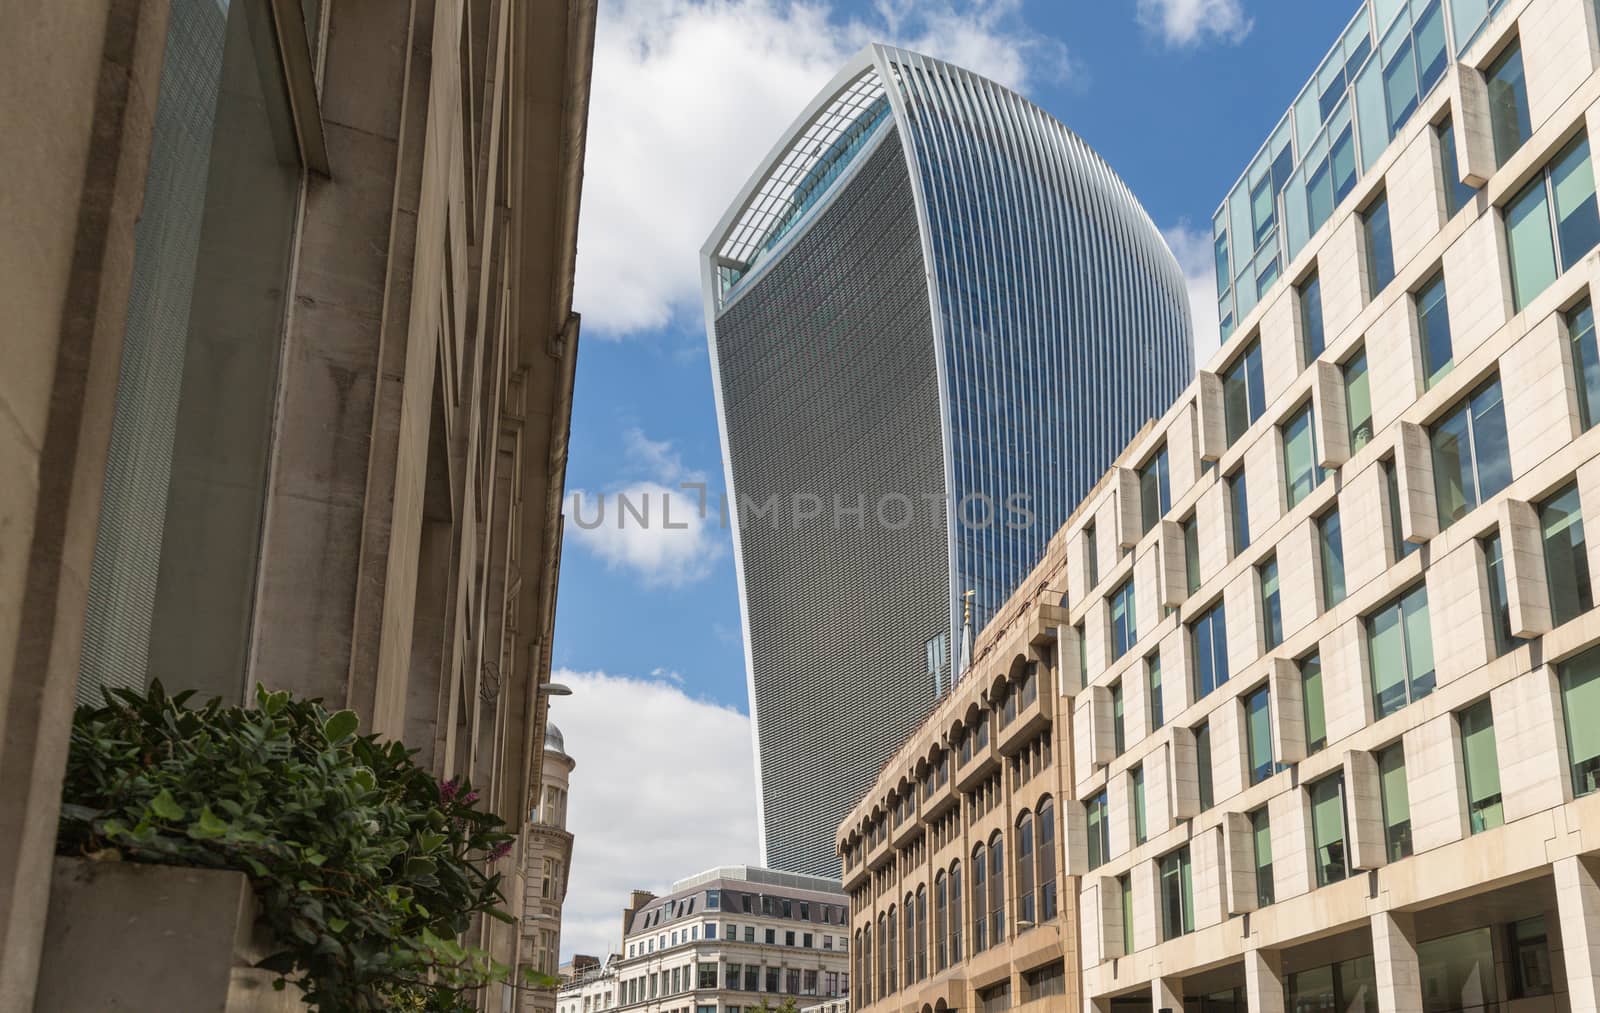 Business and Financial District of London in the UK by chrisukphoto